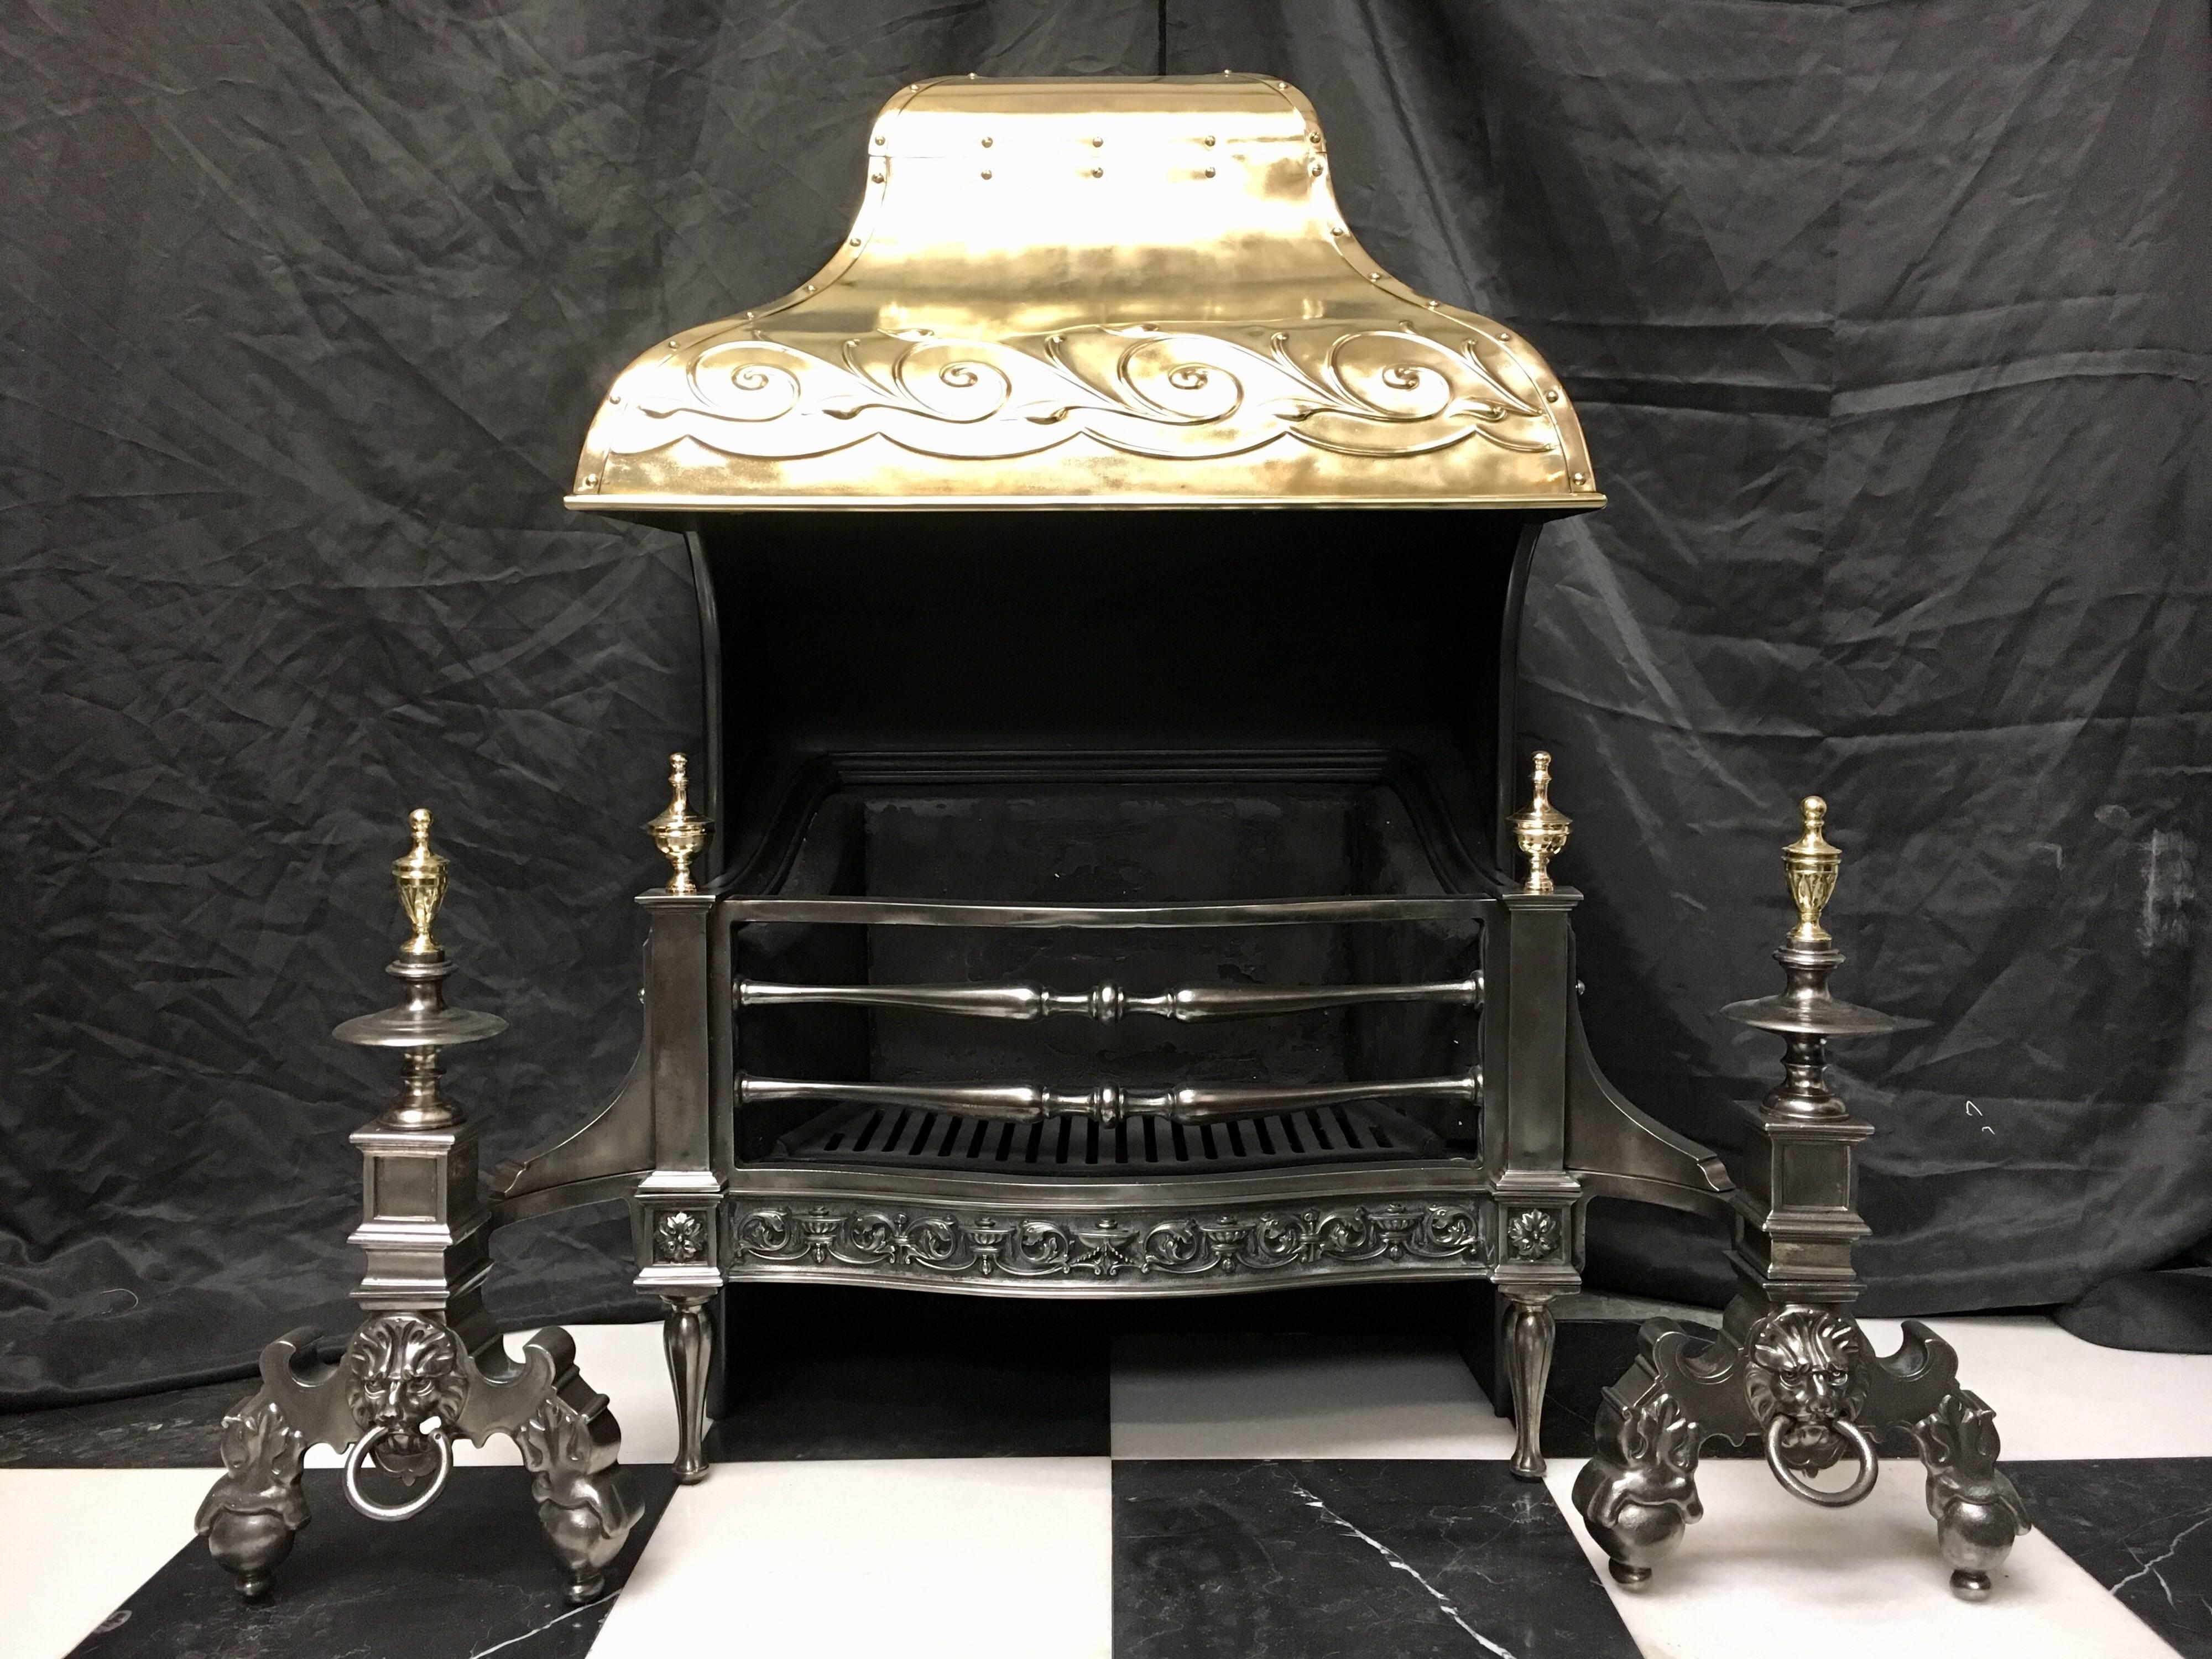 A handsome and substantial, late 19th century antique cast iron Baroque style hooded Victorian fire grate with a brass riveted and repousse hood. A three barred serpentine grate flanked by standards topped by brass finials, flanked by integral